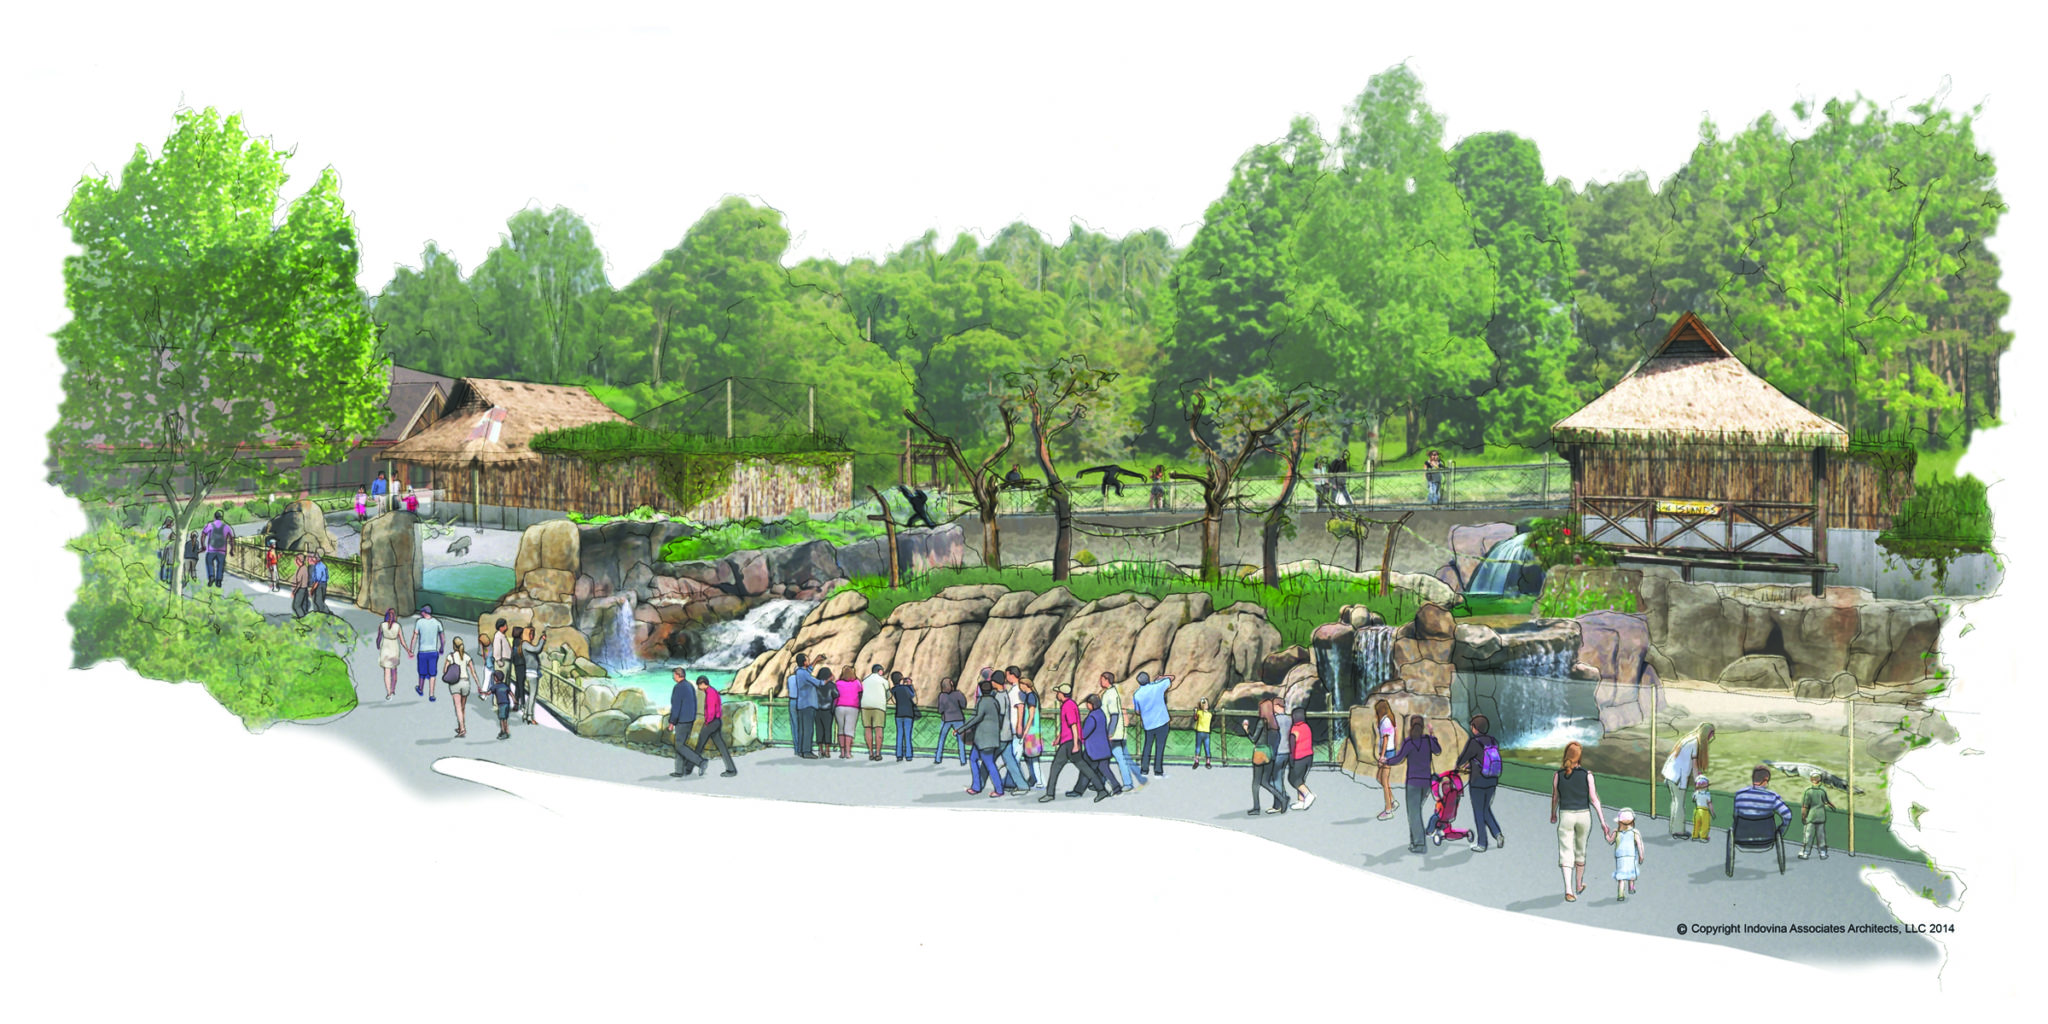 Architectural rendering of the Pittsburgh Zoo's newest exhibit, The Islands